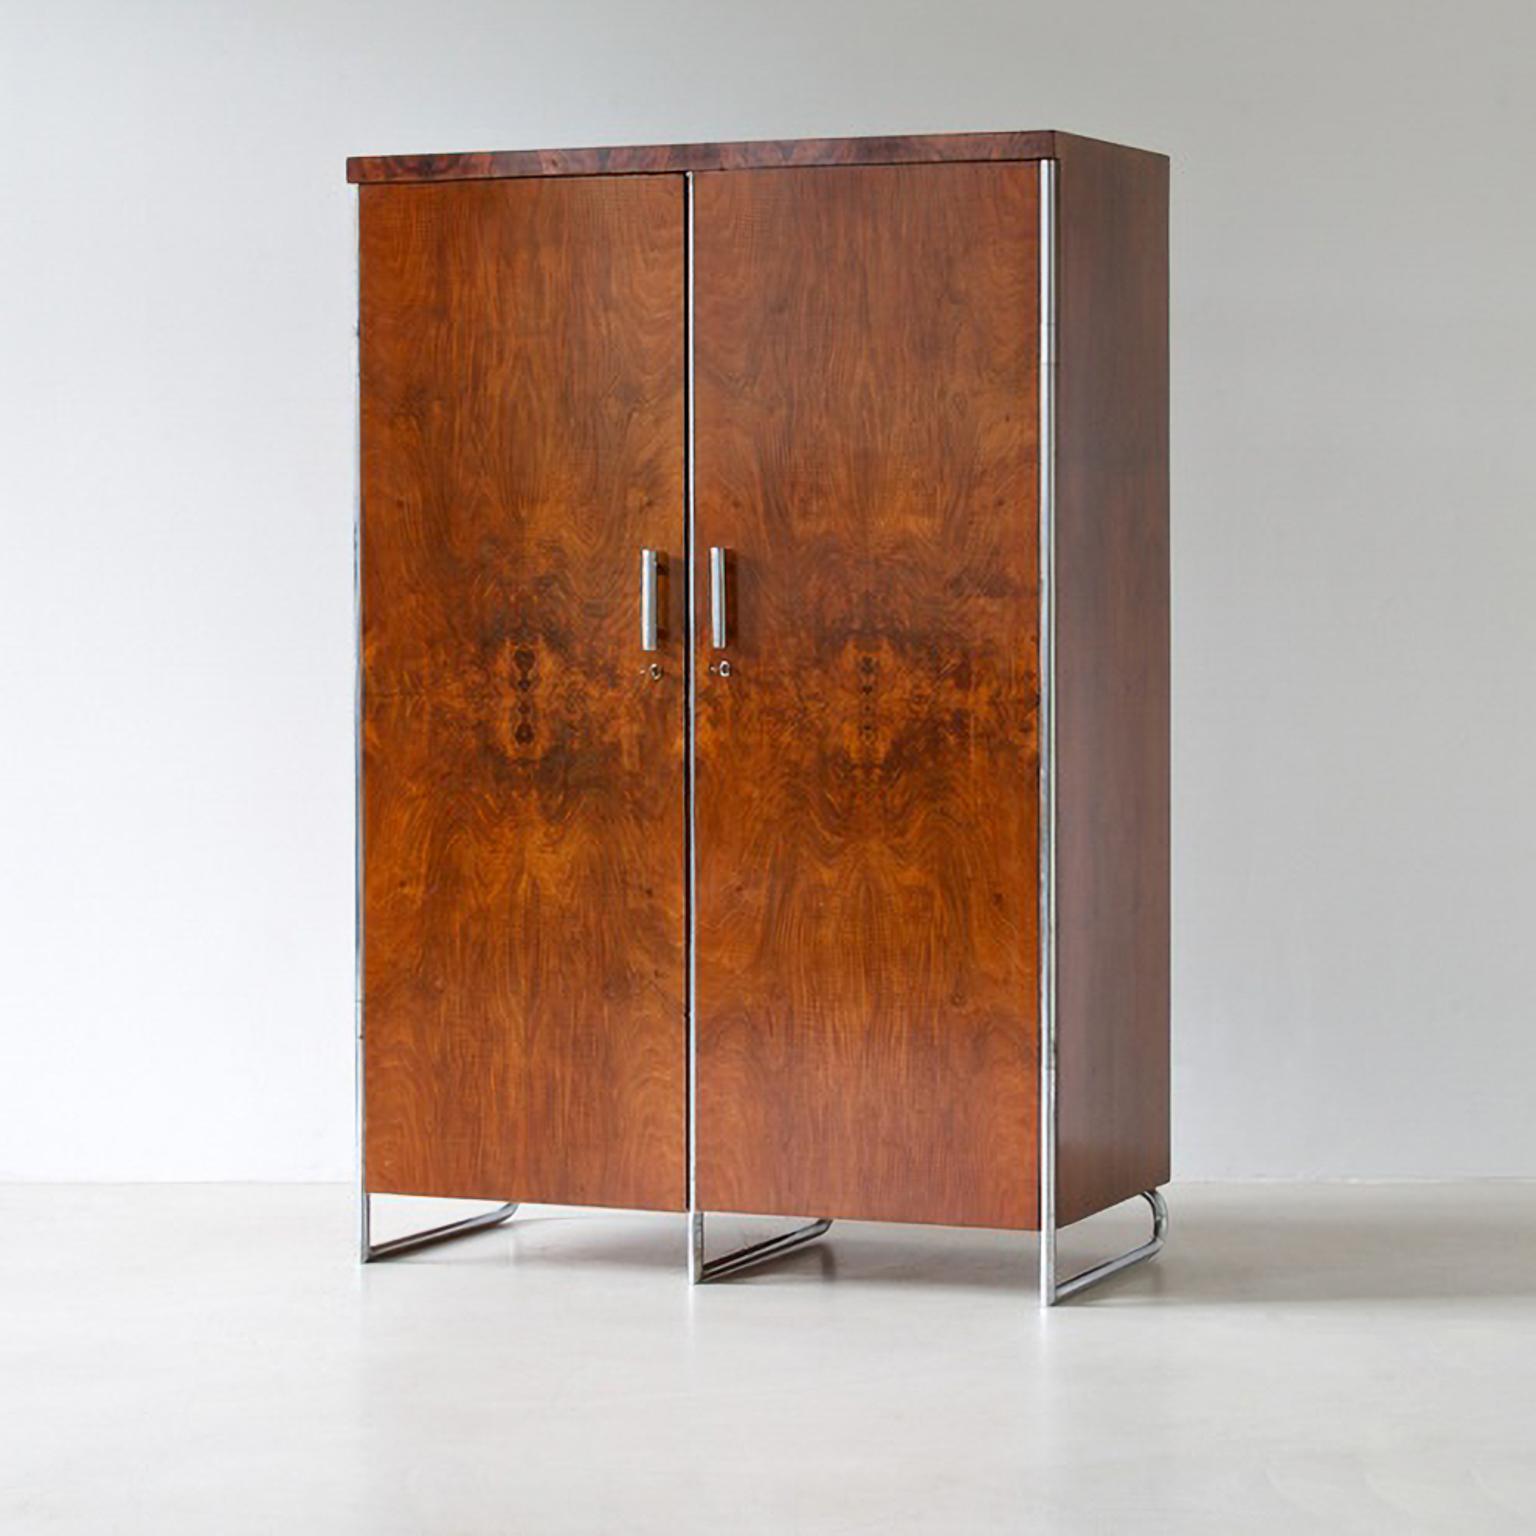 Modernist two door wardrobe designed by Hermann John Hagemann and manufactured by Thonet or Mücke-Melder, c. 1930. The wardrobe is made of chrome plated tubular steel and walnut veneered wood. 

This wardrobes are restored on request, delivery time